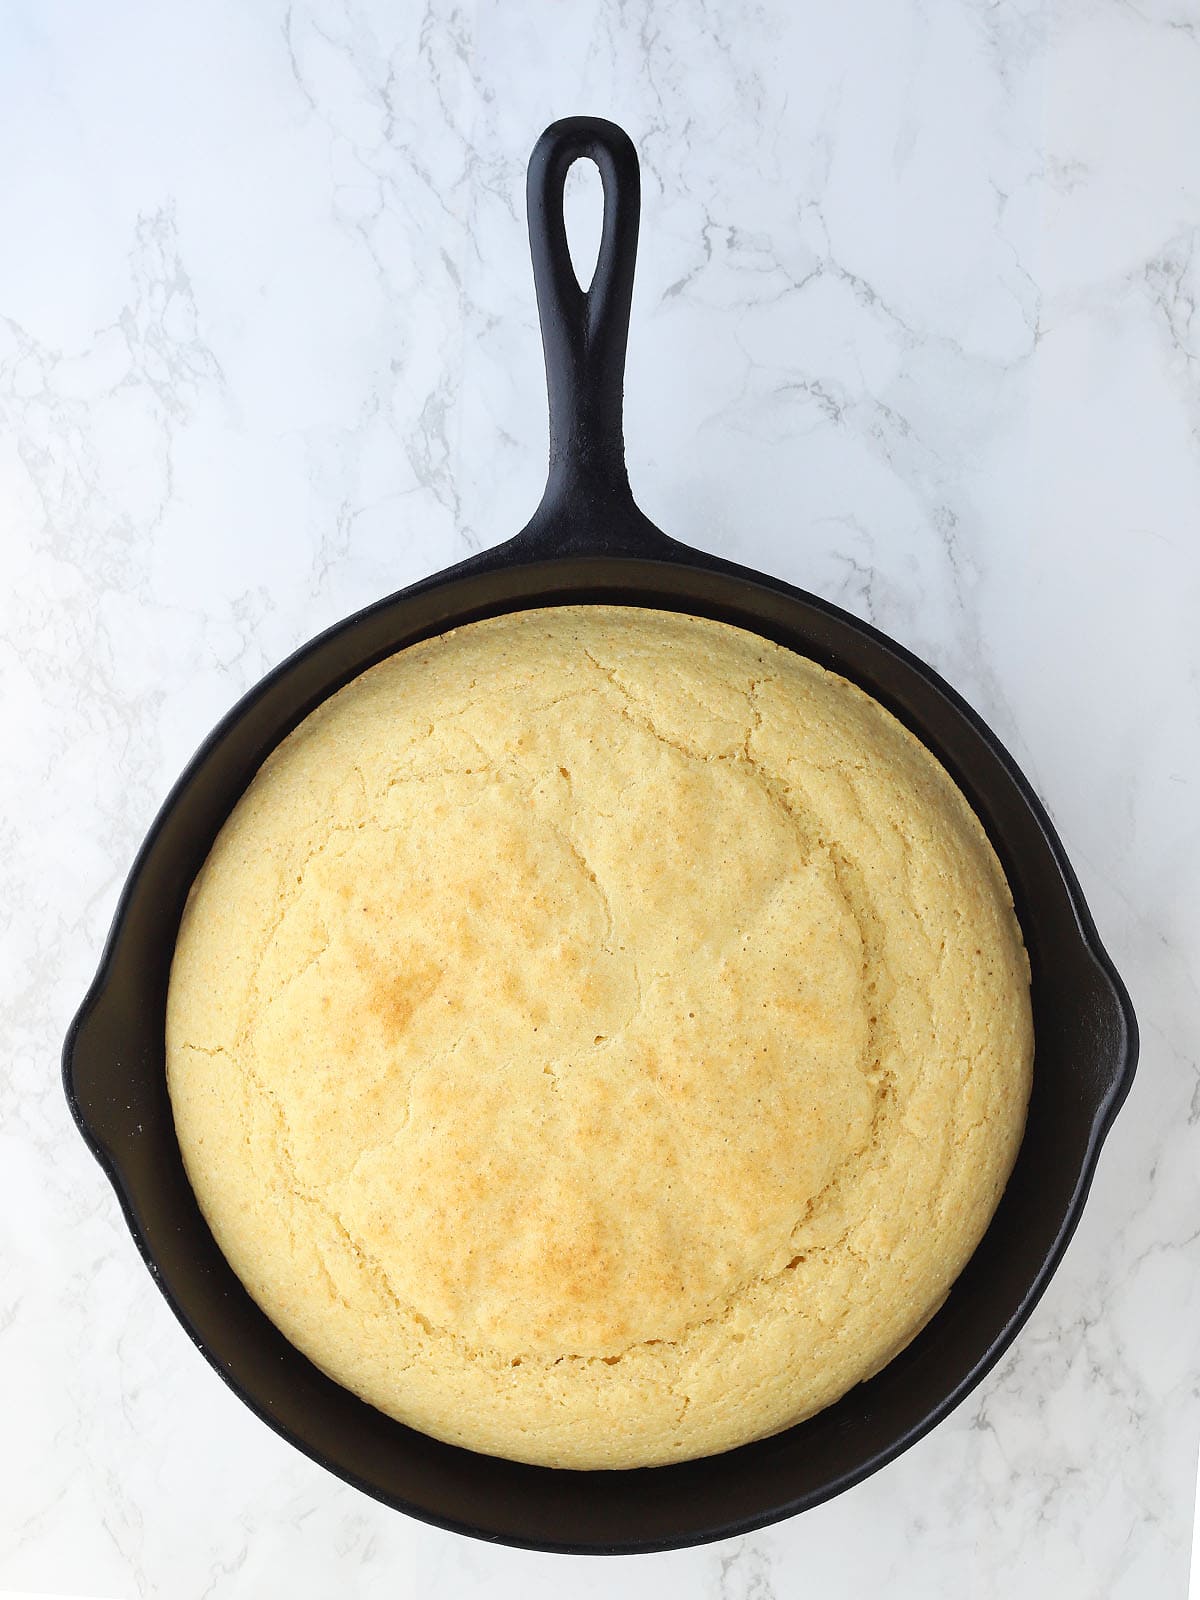 Baked cornbread in a cast iron skillet on a white background.